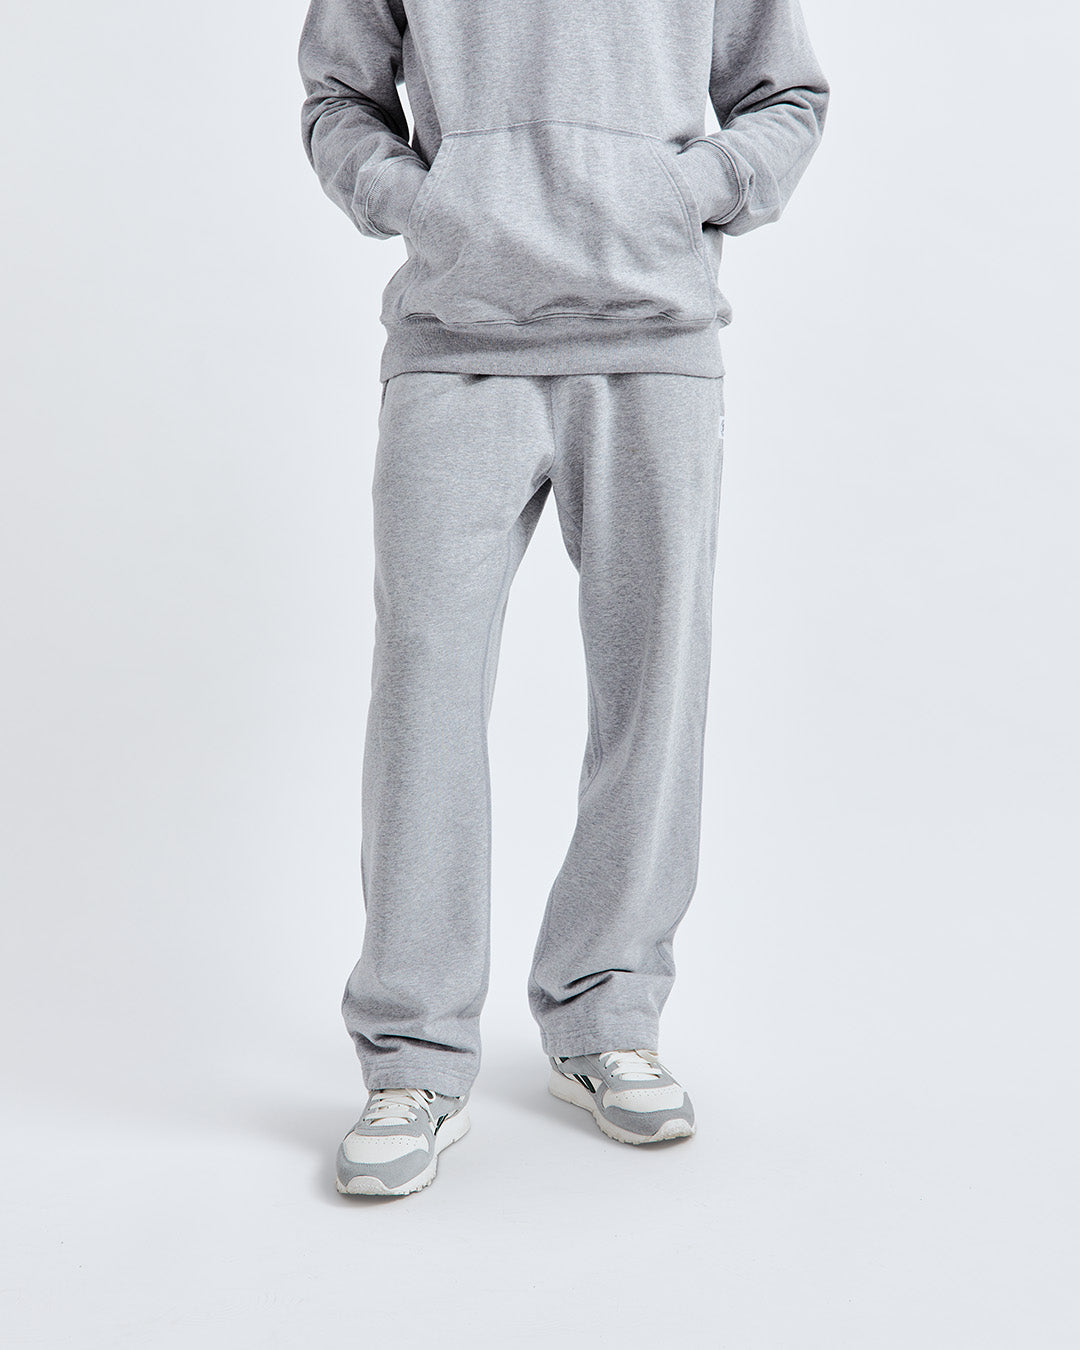 Mens Tracksuits  Champs Sports Canada